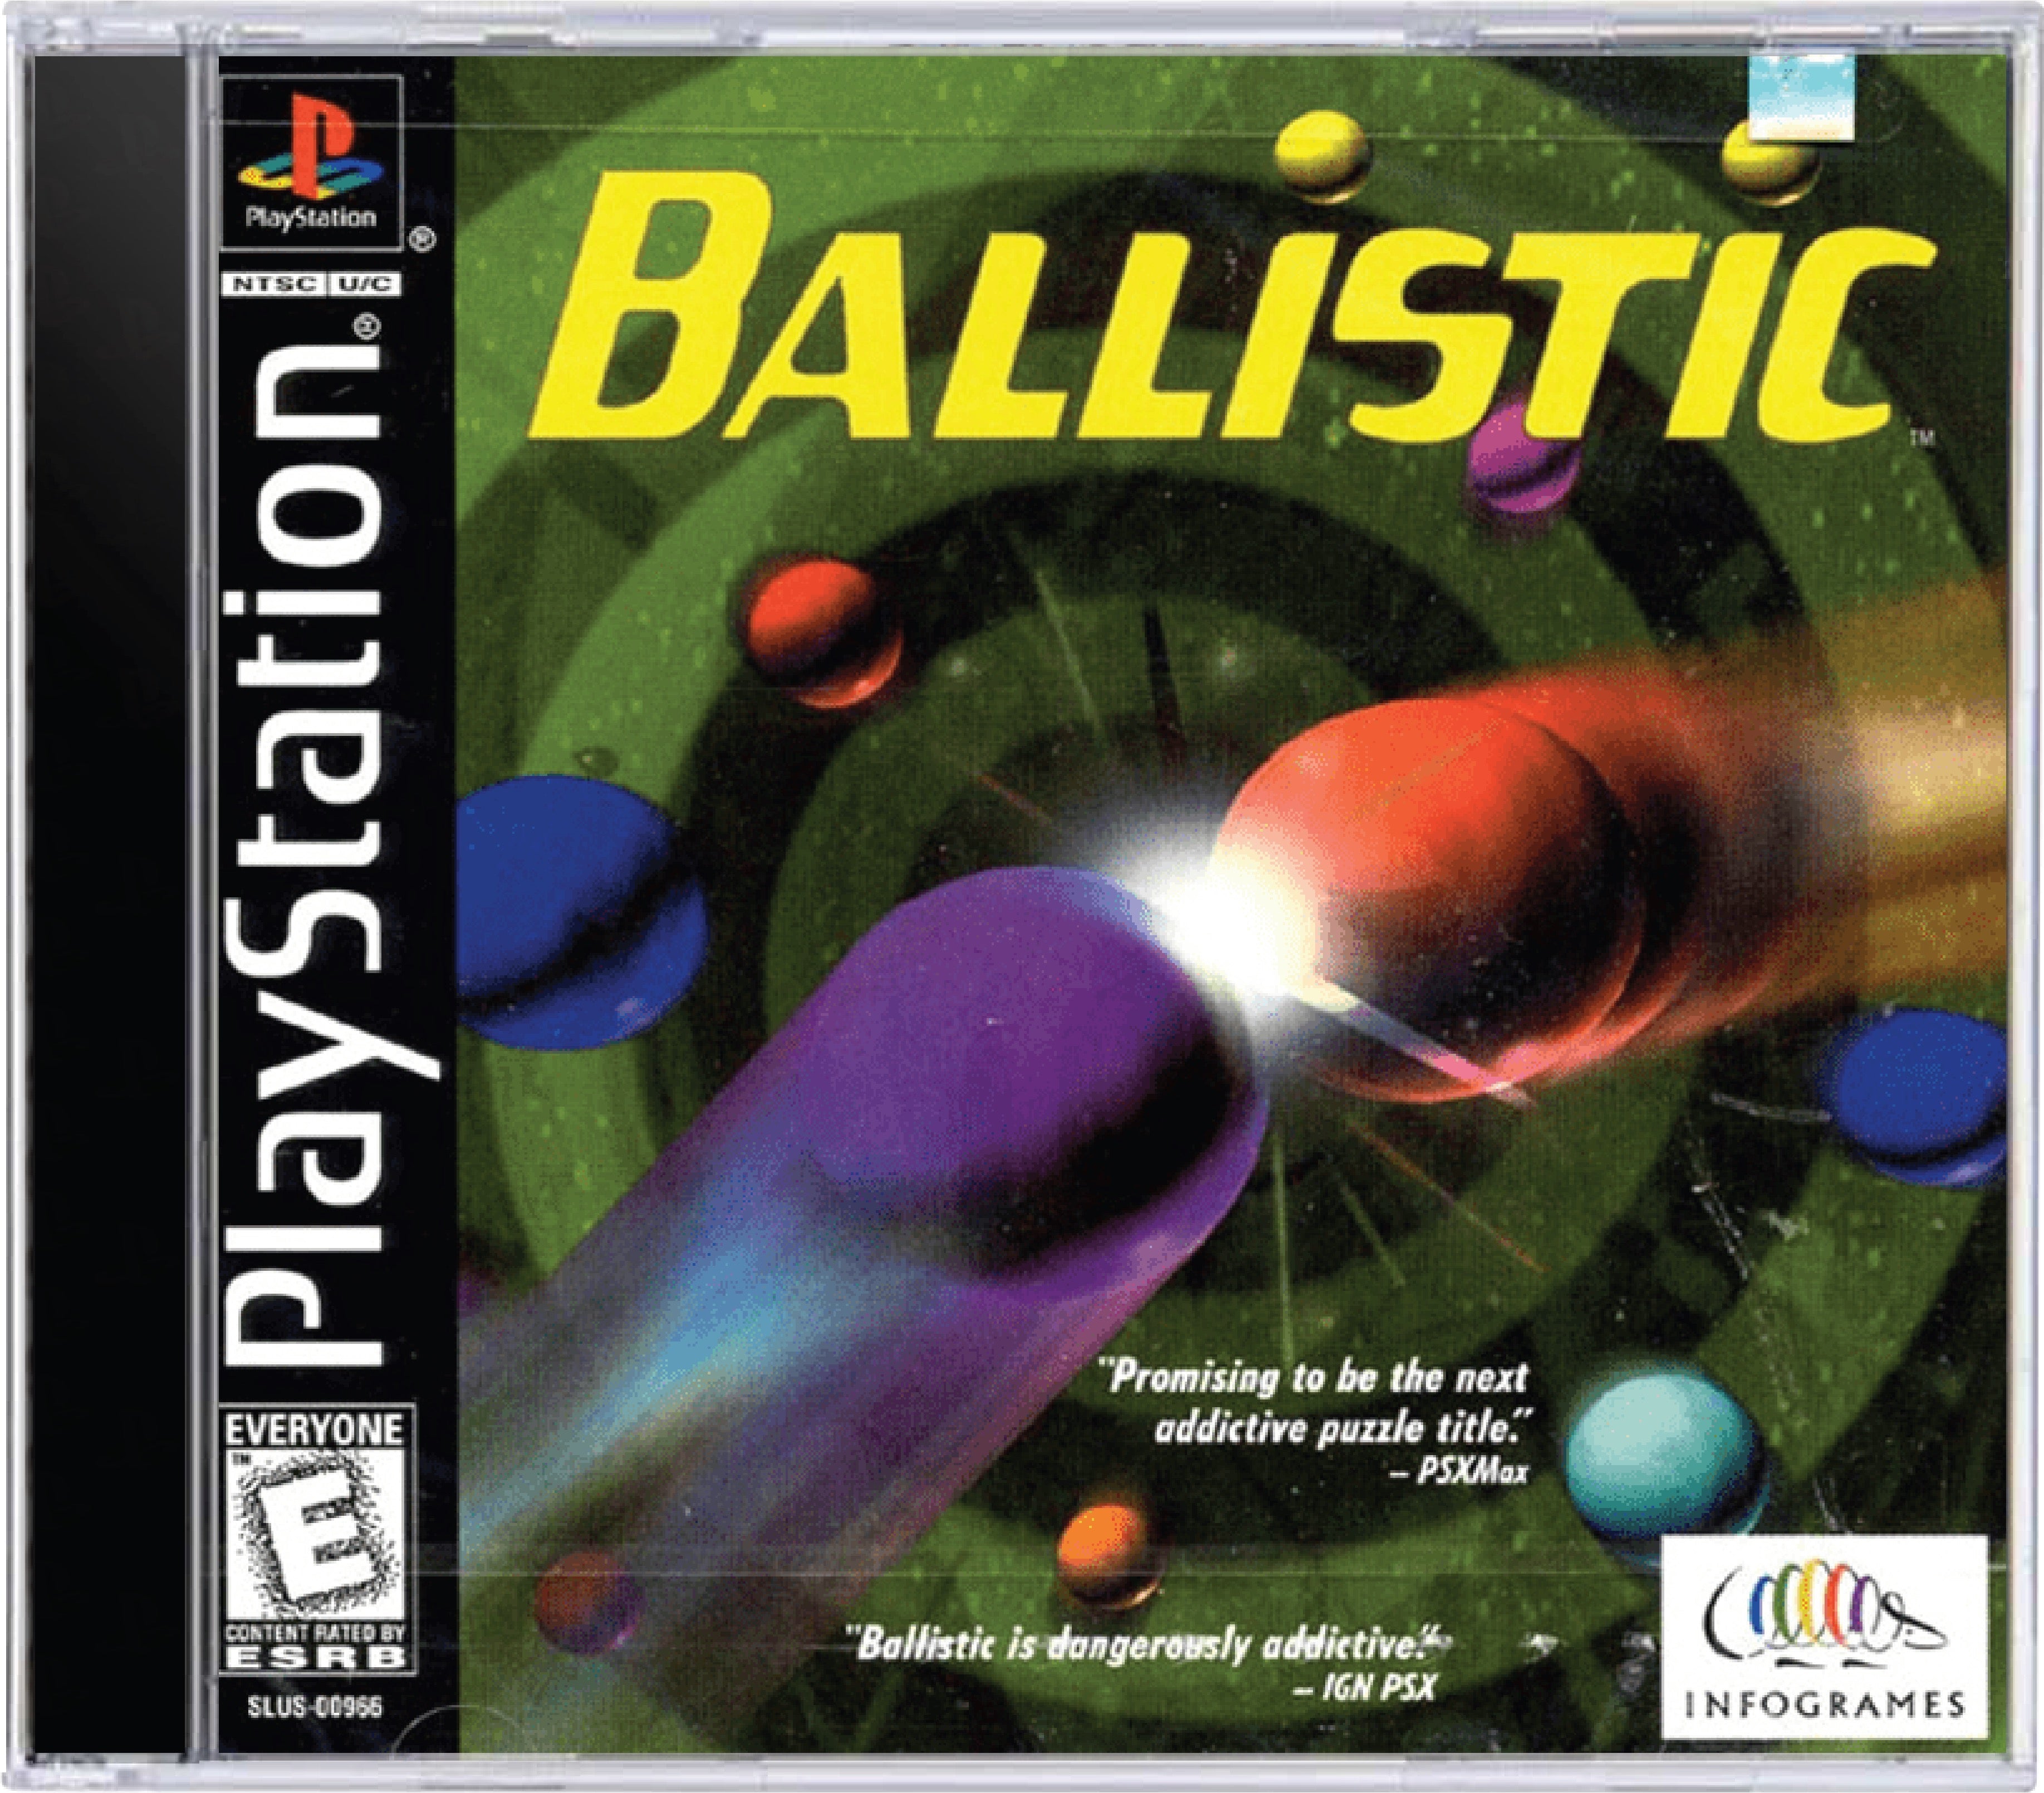 Ballistic Cover Art and Product Photo